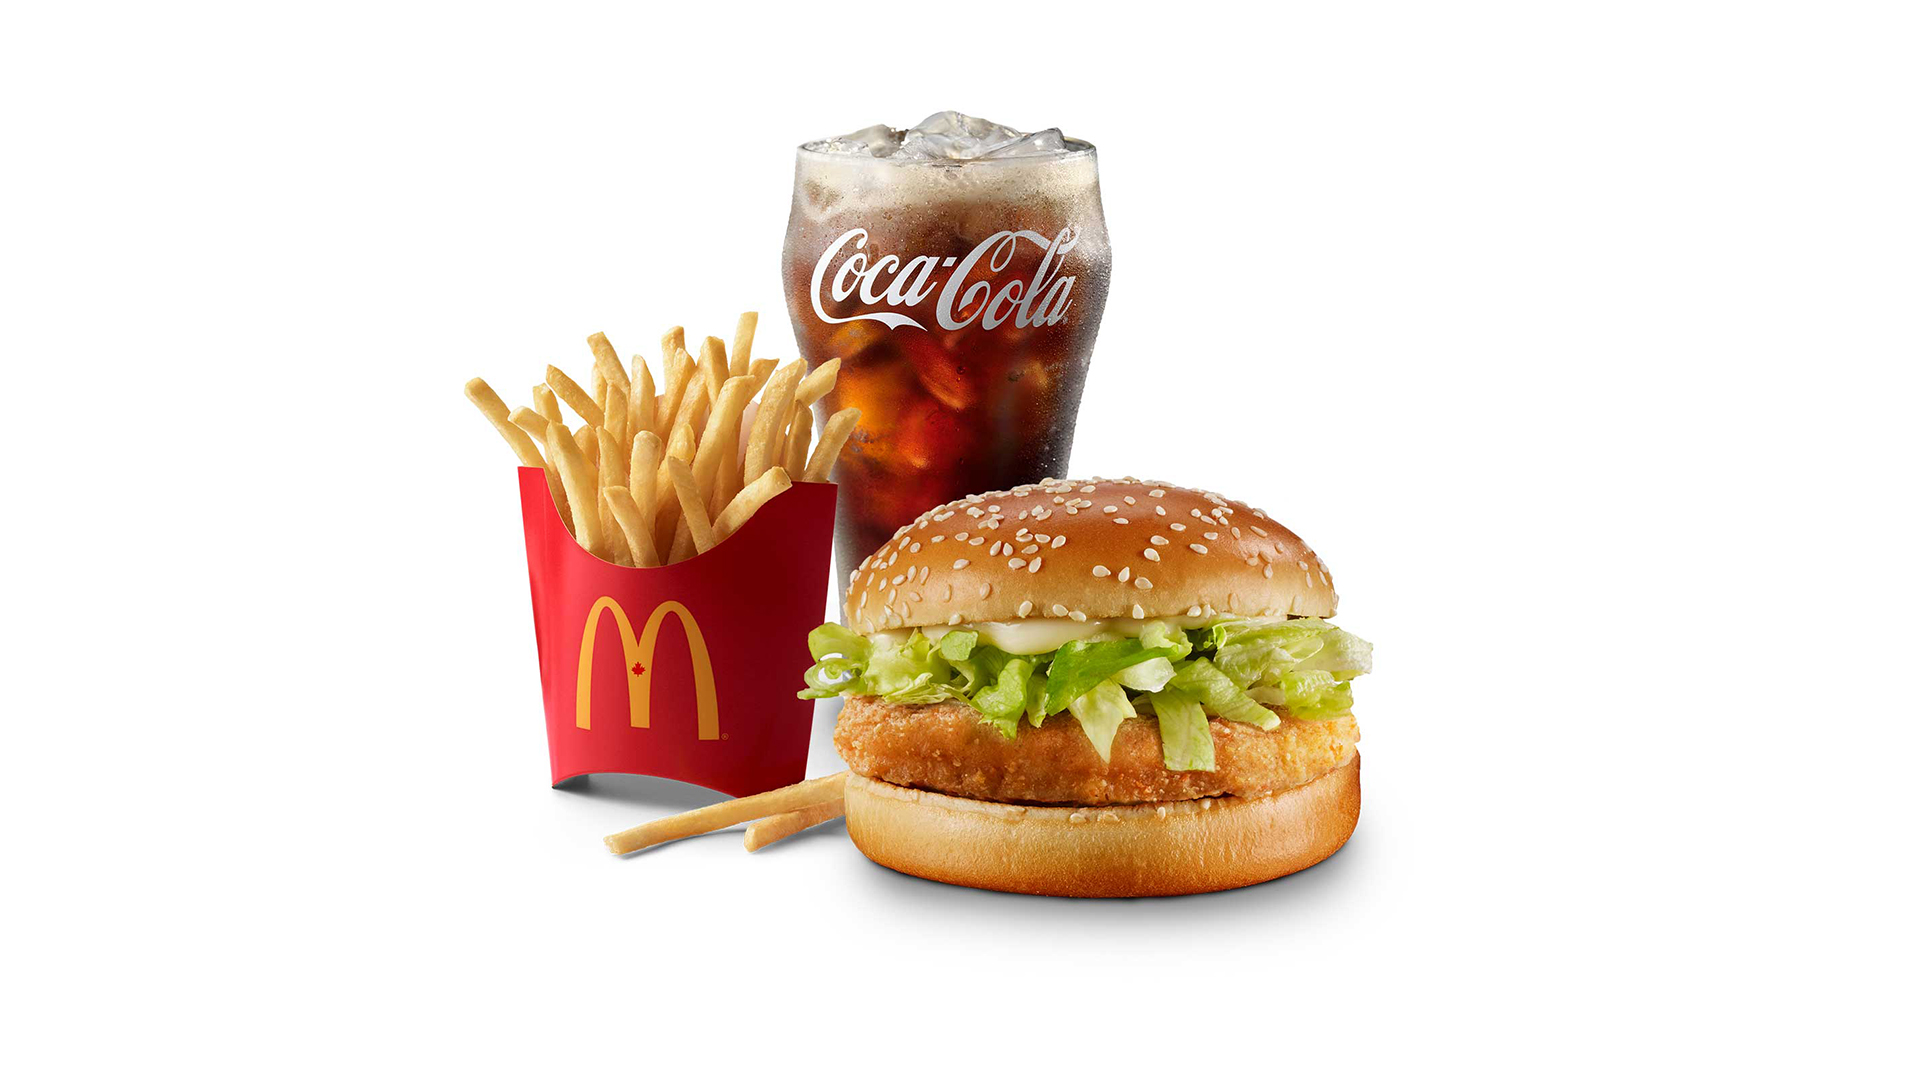 McChicken Extra Value Meal 620-1052 Cals.